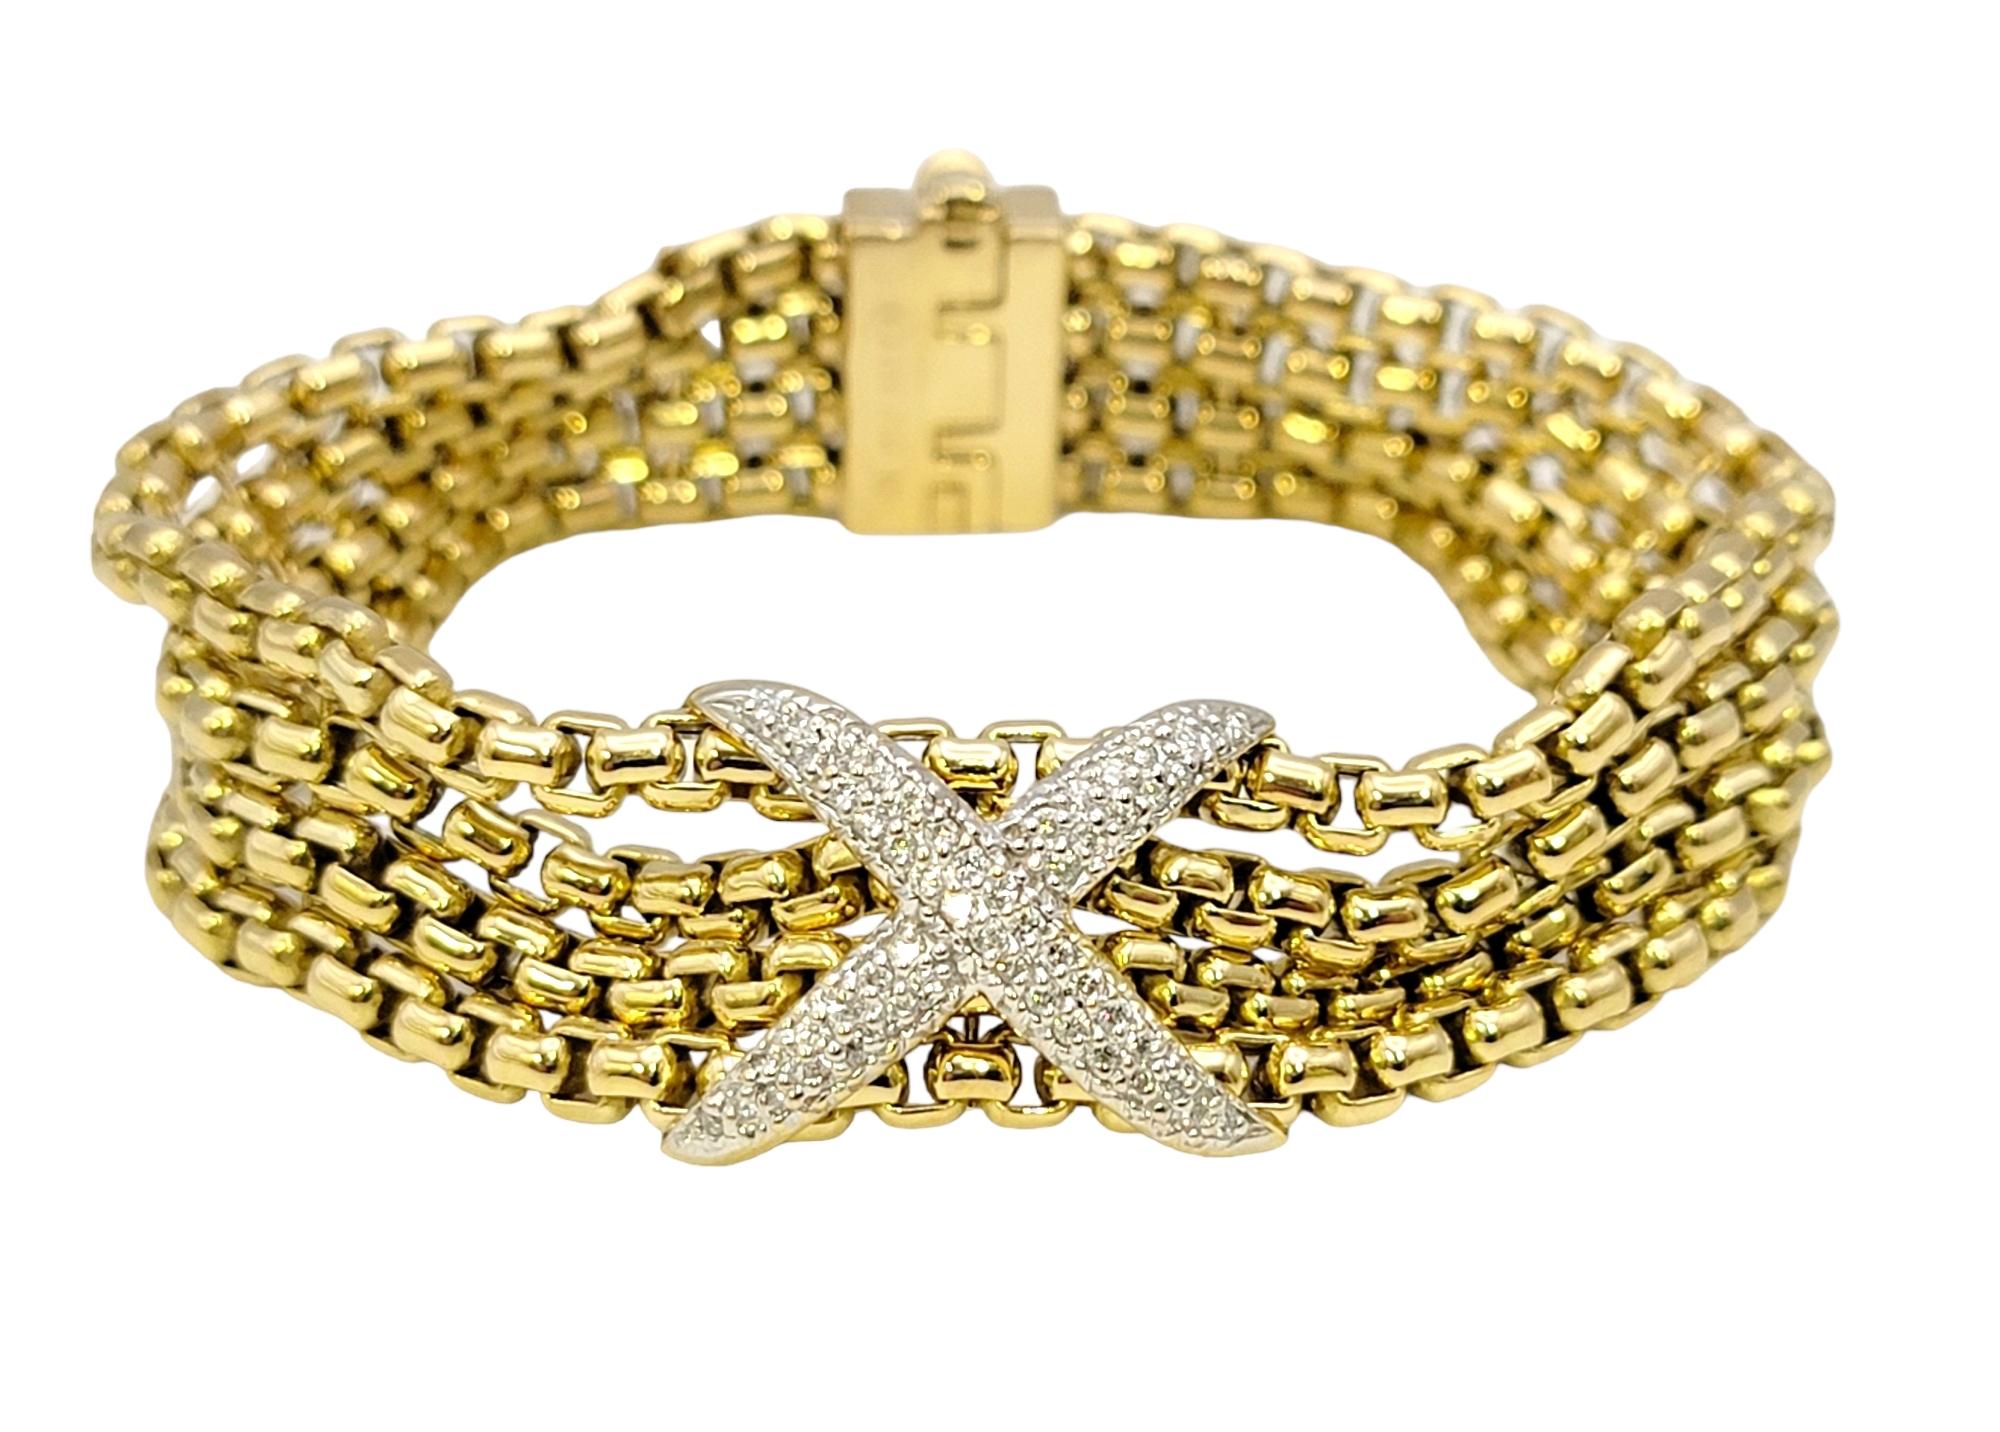 Lovely gold and diamond multi-row bracelet by popular jewelry designer, David Yurman. Founded in 1980 by artists David and Sybil Yurman, the company is, in their own words, “one long art project.” Their ability to fuse fashion, art and jewelry into